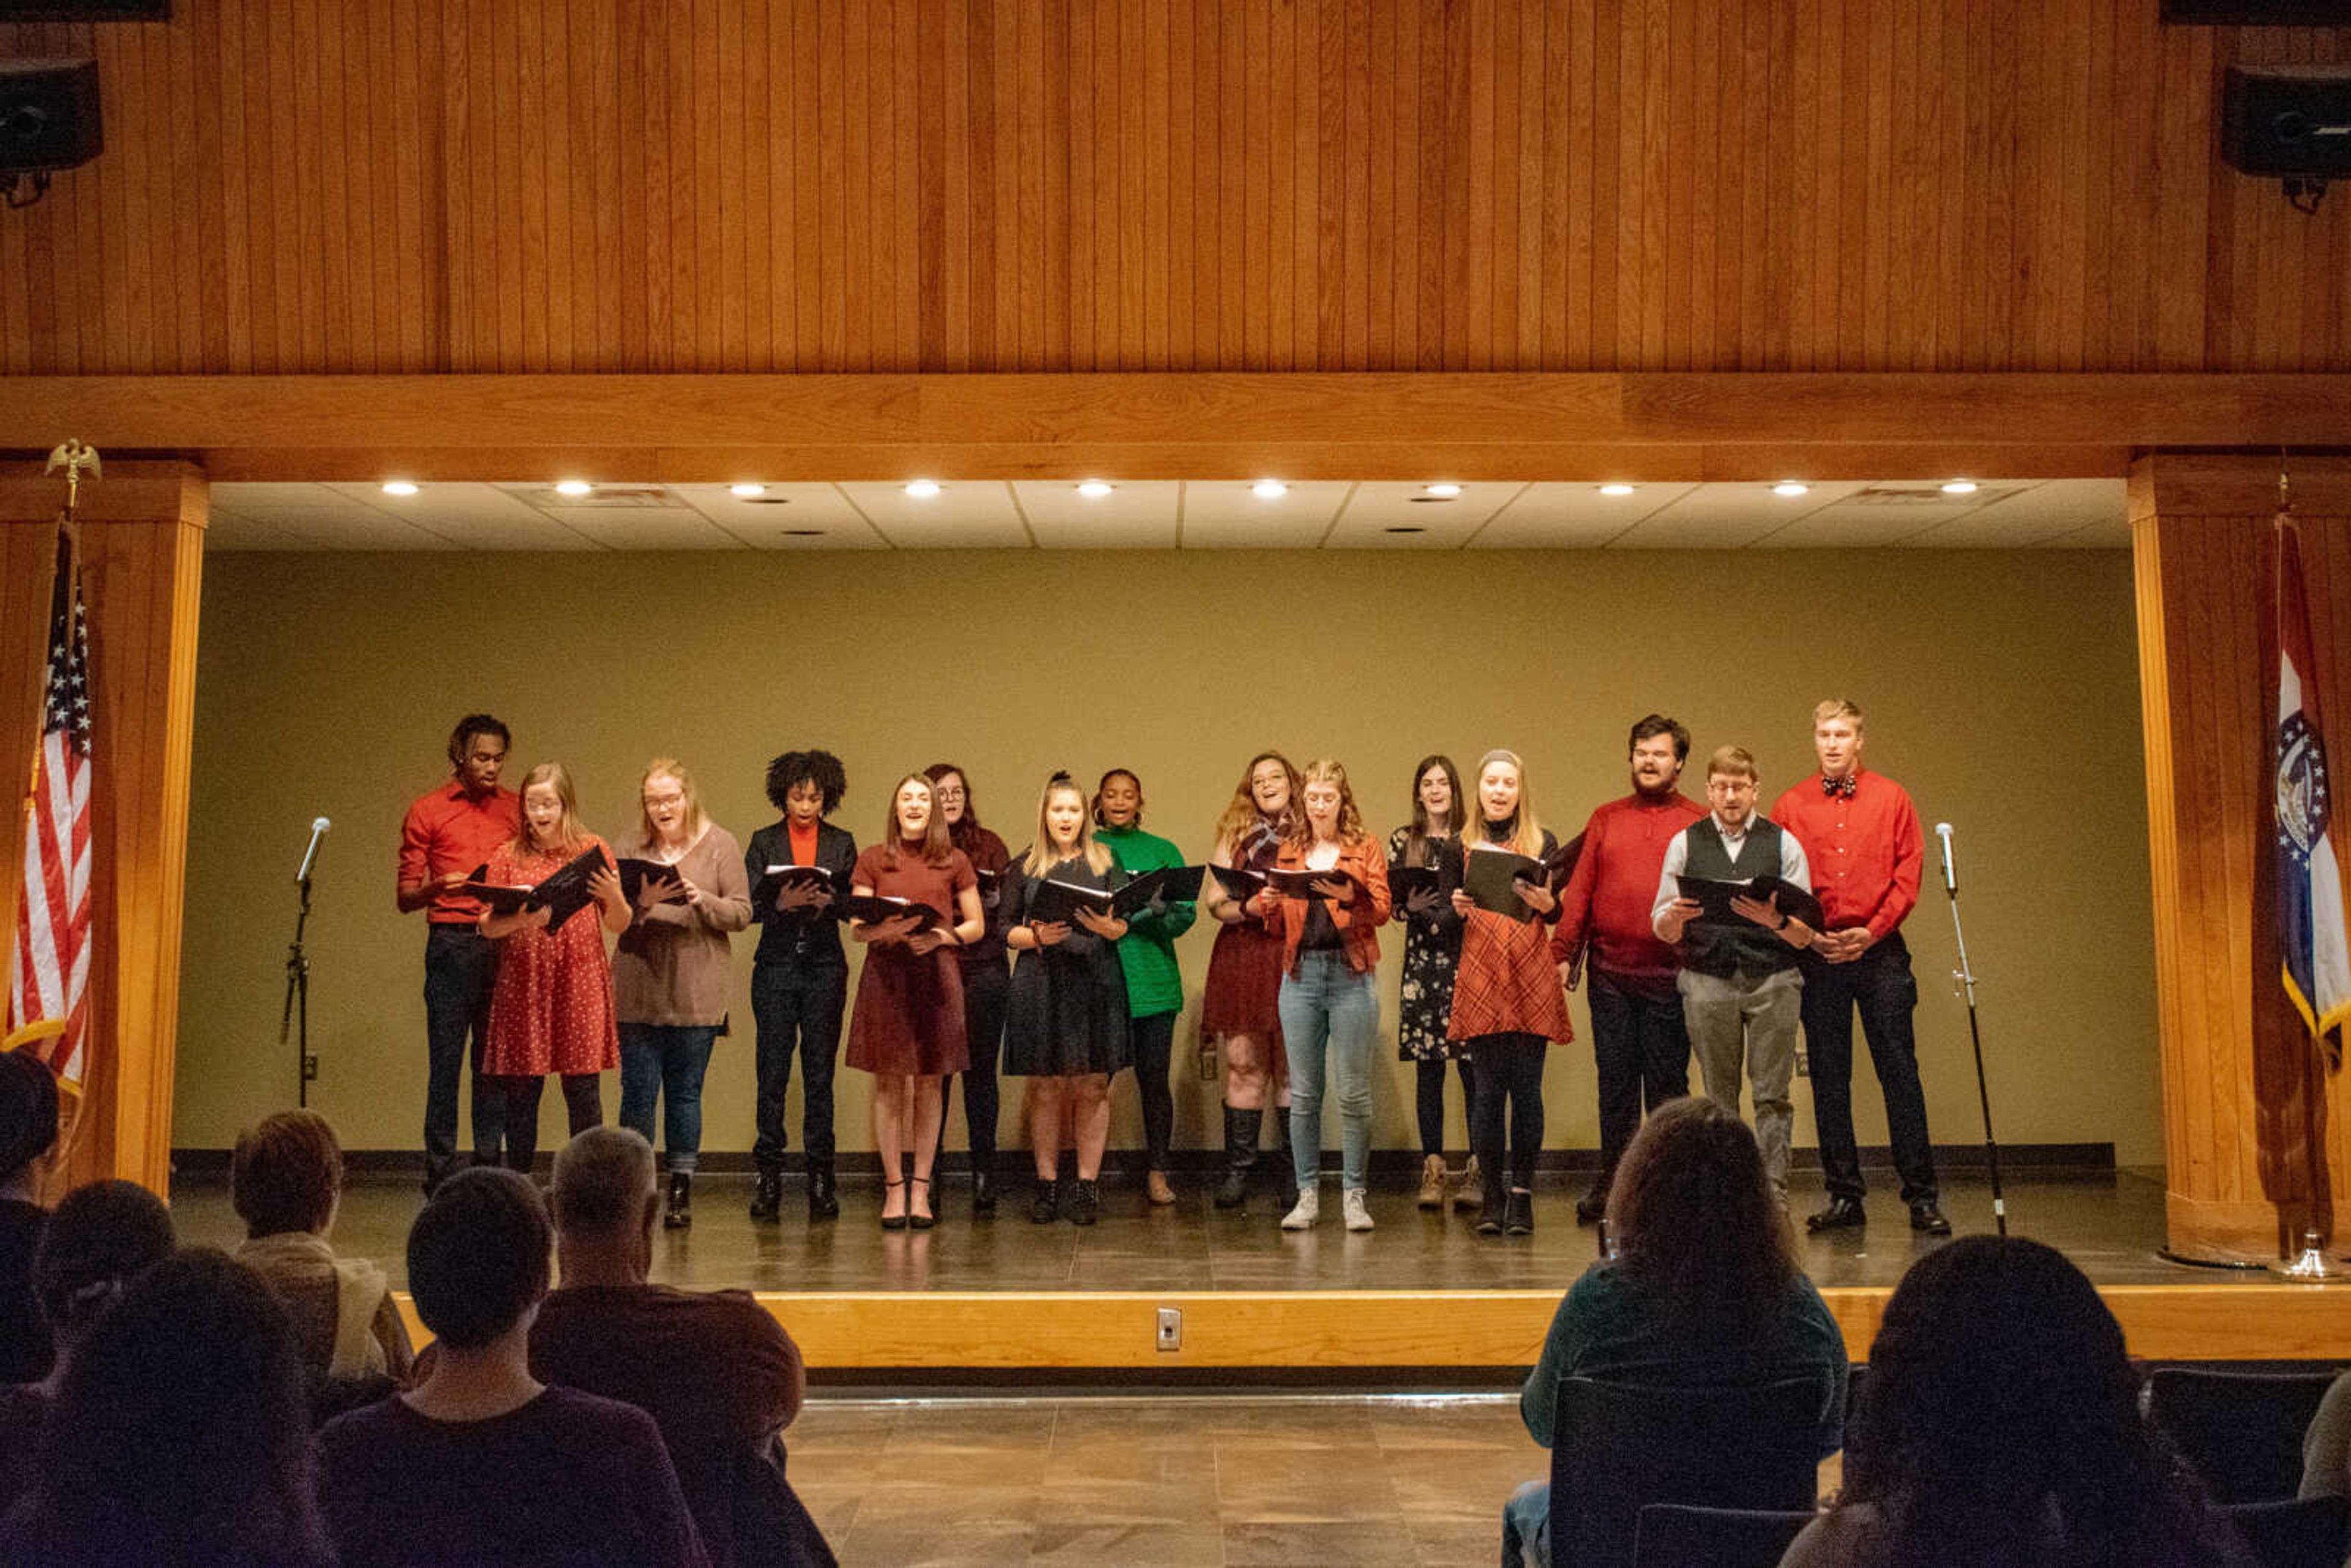 Redhawk Rhythm A Cappella Singers performing Christmas songs at their holiday concert on stage in the University Ballroom on Dec. 3.